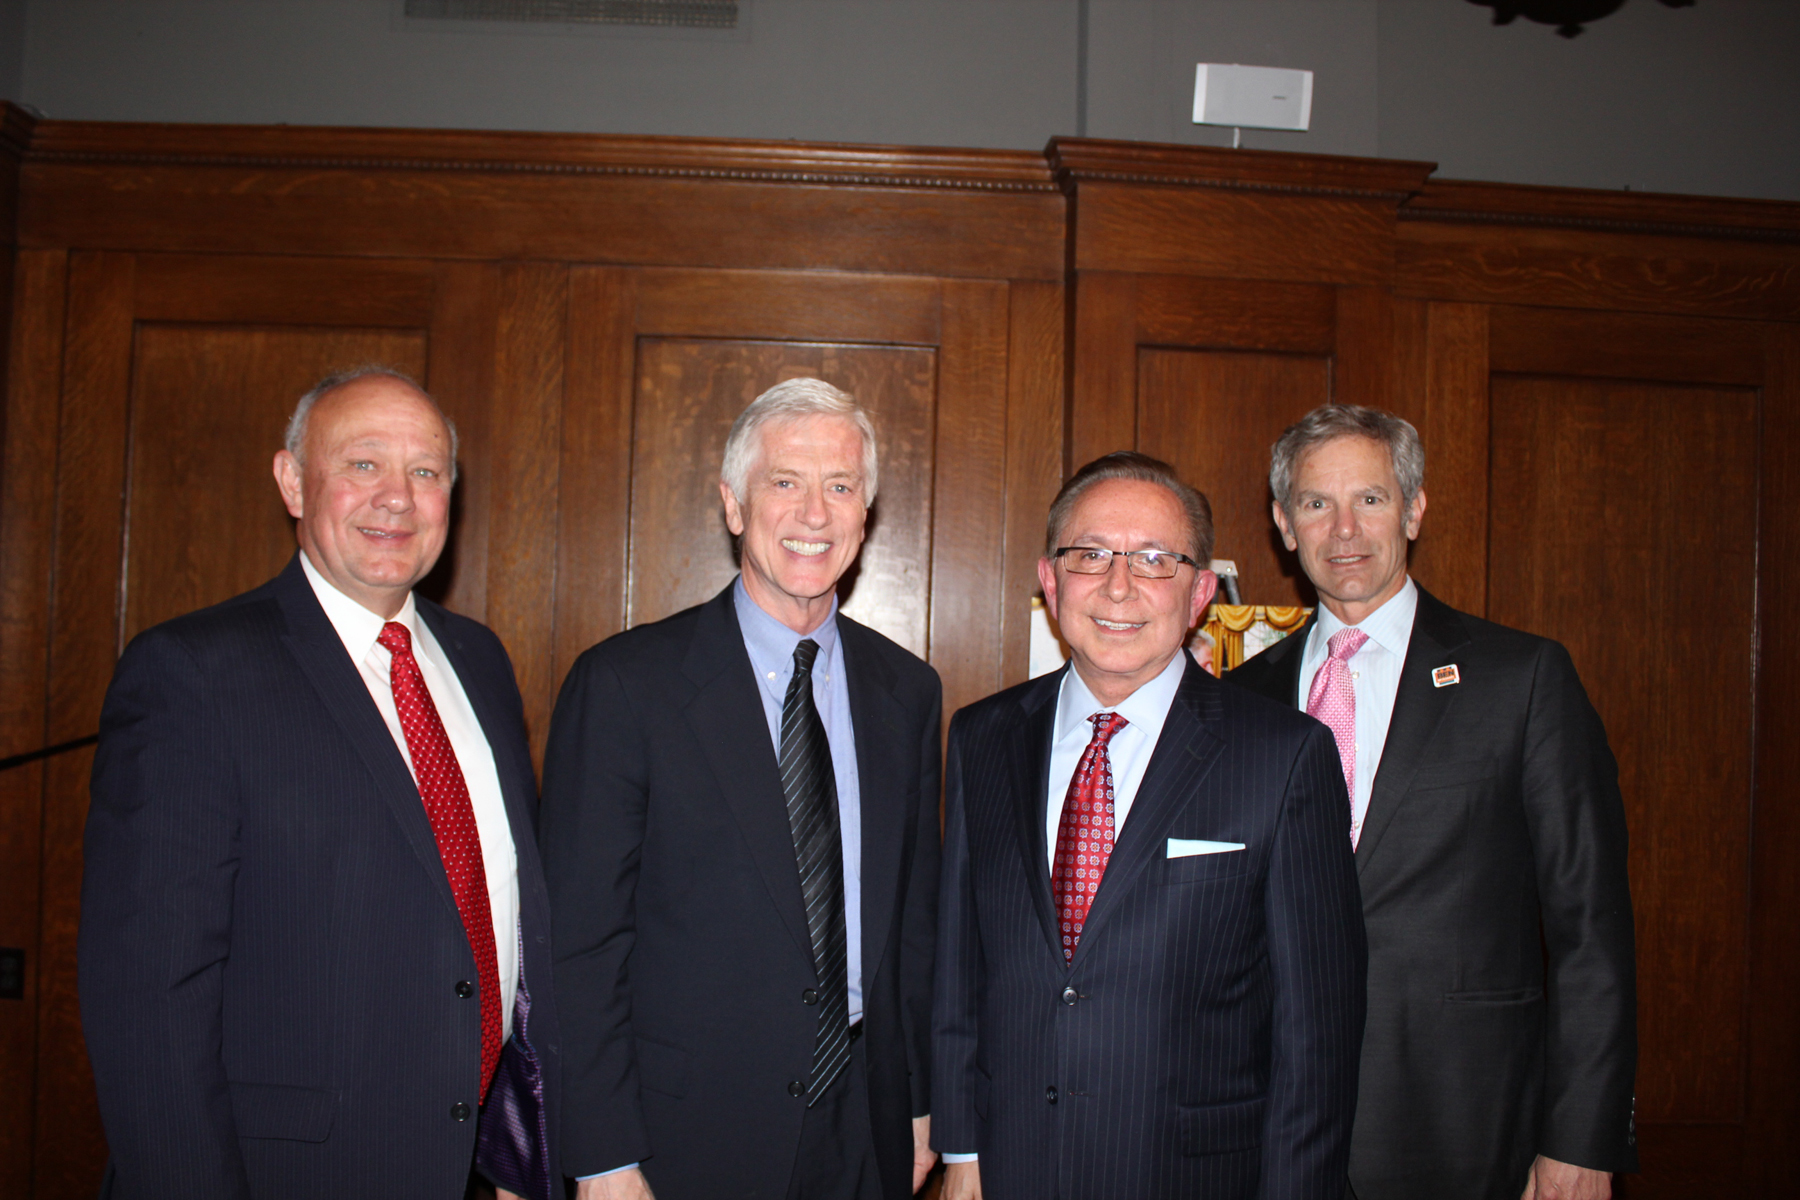 Left to Right: Lane Beattie, President and CEO of the Salt Lake City Chamber of Commerce and former Utah Senate President, former Salt Lake City Mayor Rocky Anderson, The Honorable Mickey Ibarra, former Assistant to the President and Director of Intergovernmental Affairs for The White House during the Clinton administration (1997 – 2001), and Salt Lake City Mayor Ralph Becker.